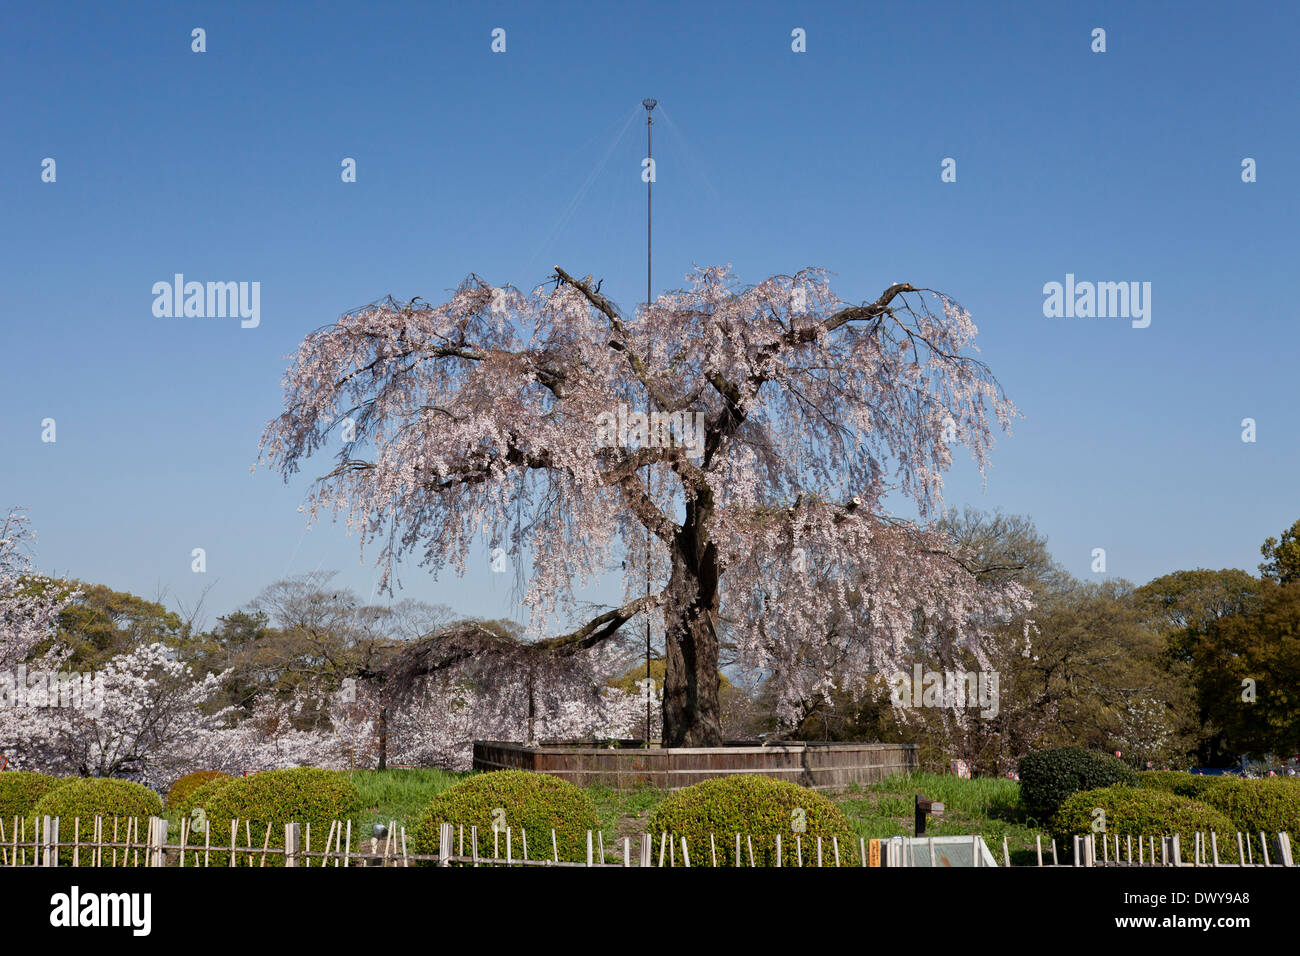 Weeping cherry tree, Kyoto Prefecture, Japan Stock Photo